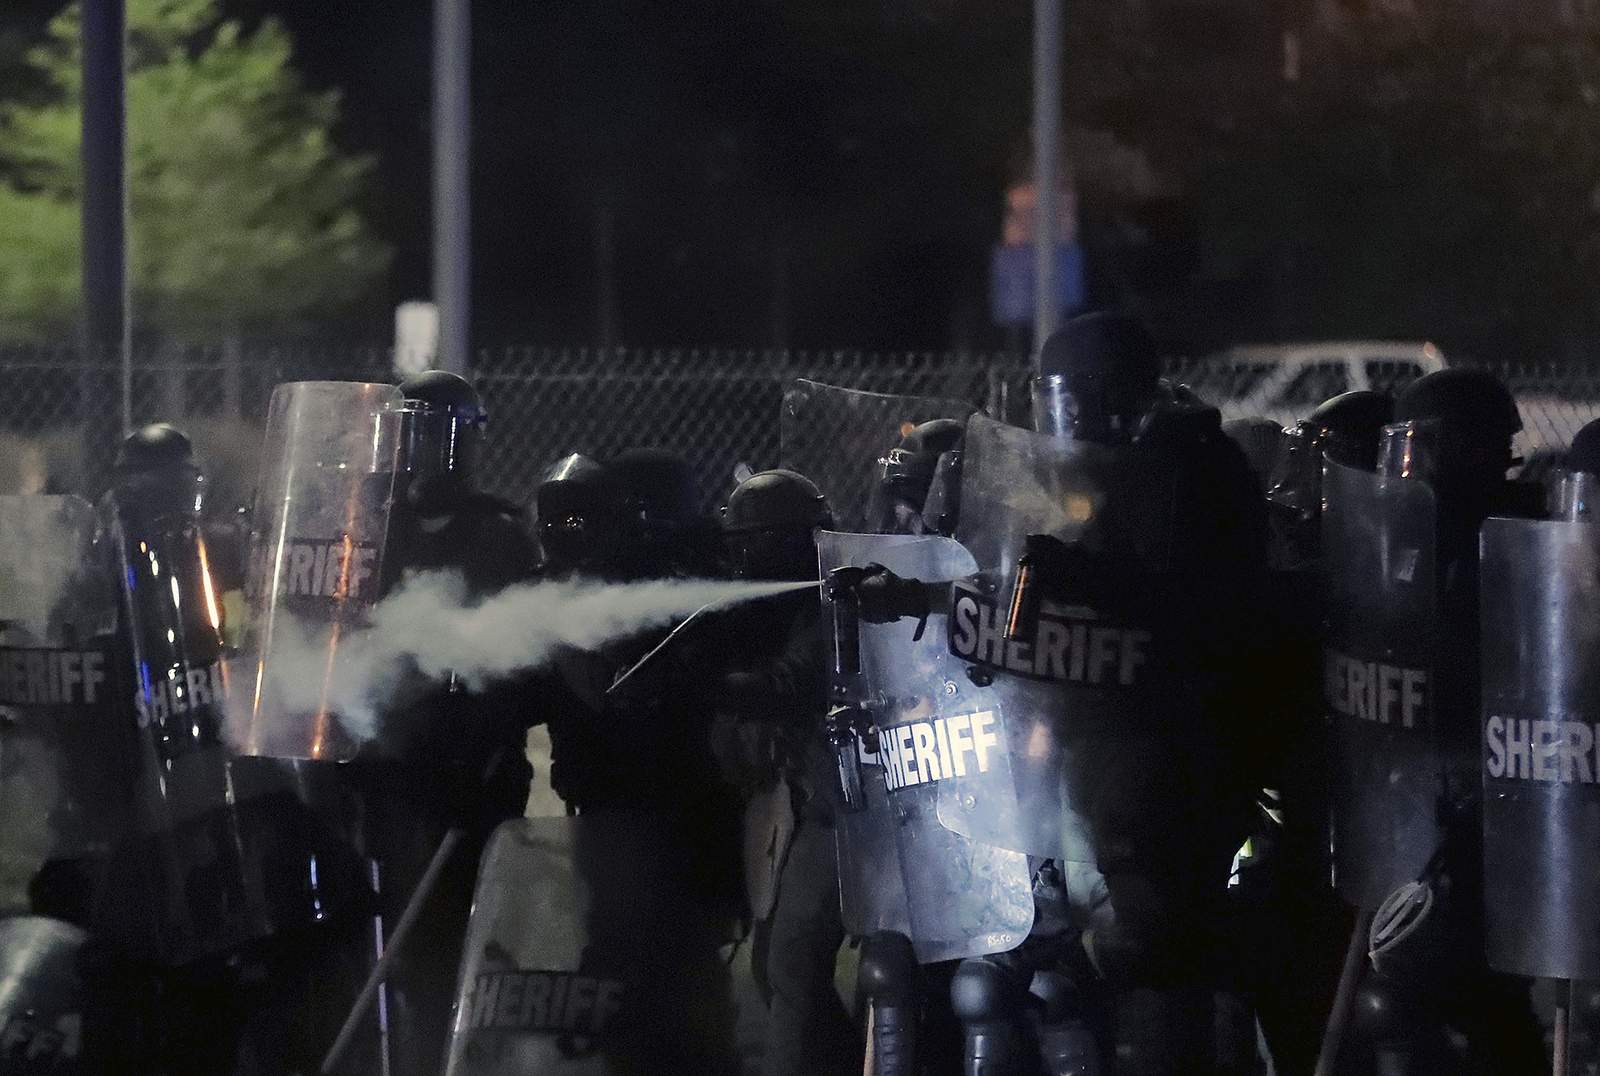 Use of force criticized in protests about police brutality